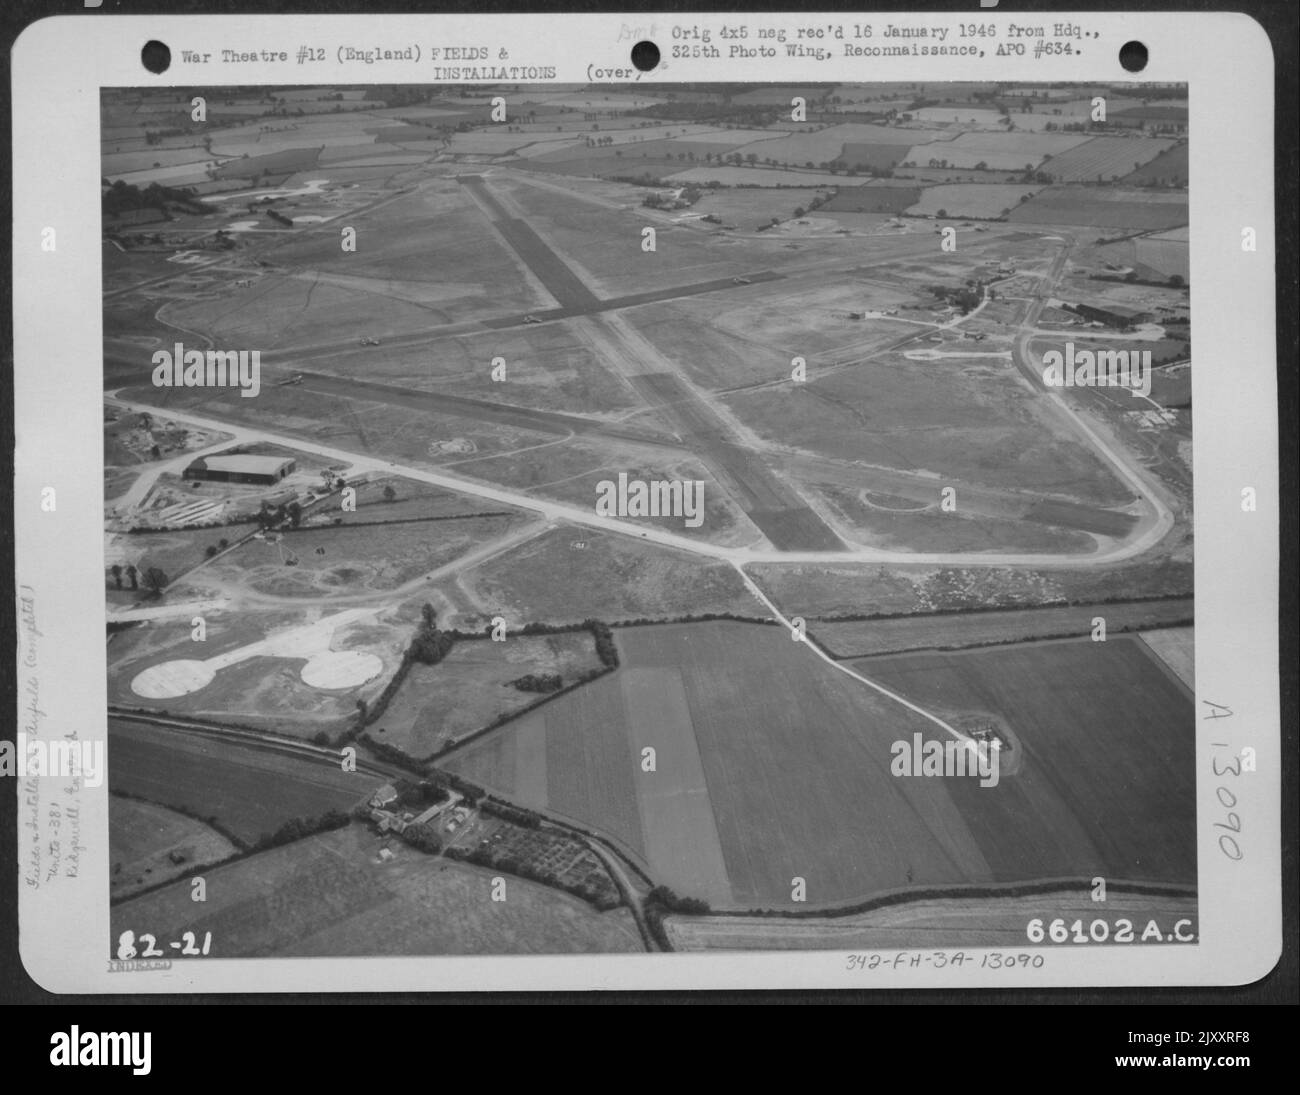 Aerial View Of The 8Th Air Force Station 167 Facing Southeast, Showing Radio Shack In Foreground And Control Tower In Right Center. 381St Bomb Group - Ridgewell, Essex County, England. Stock Photo